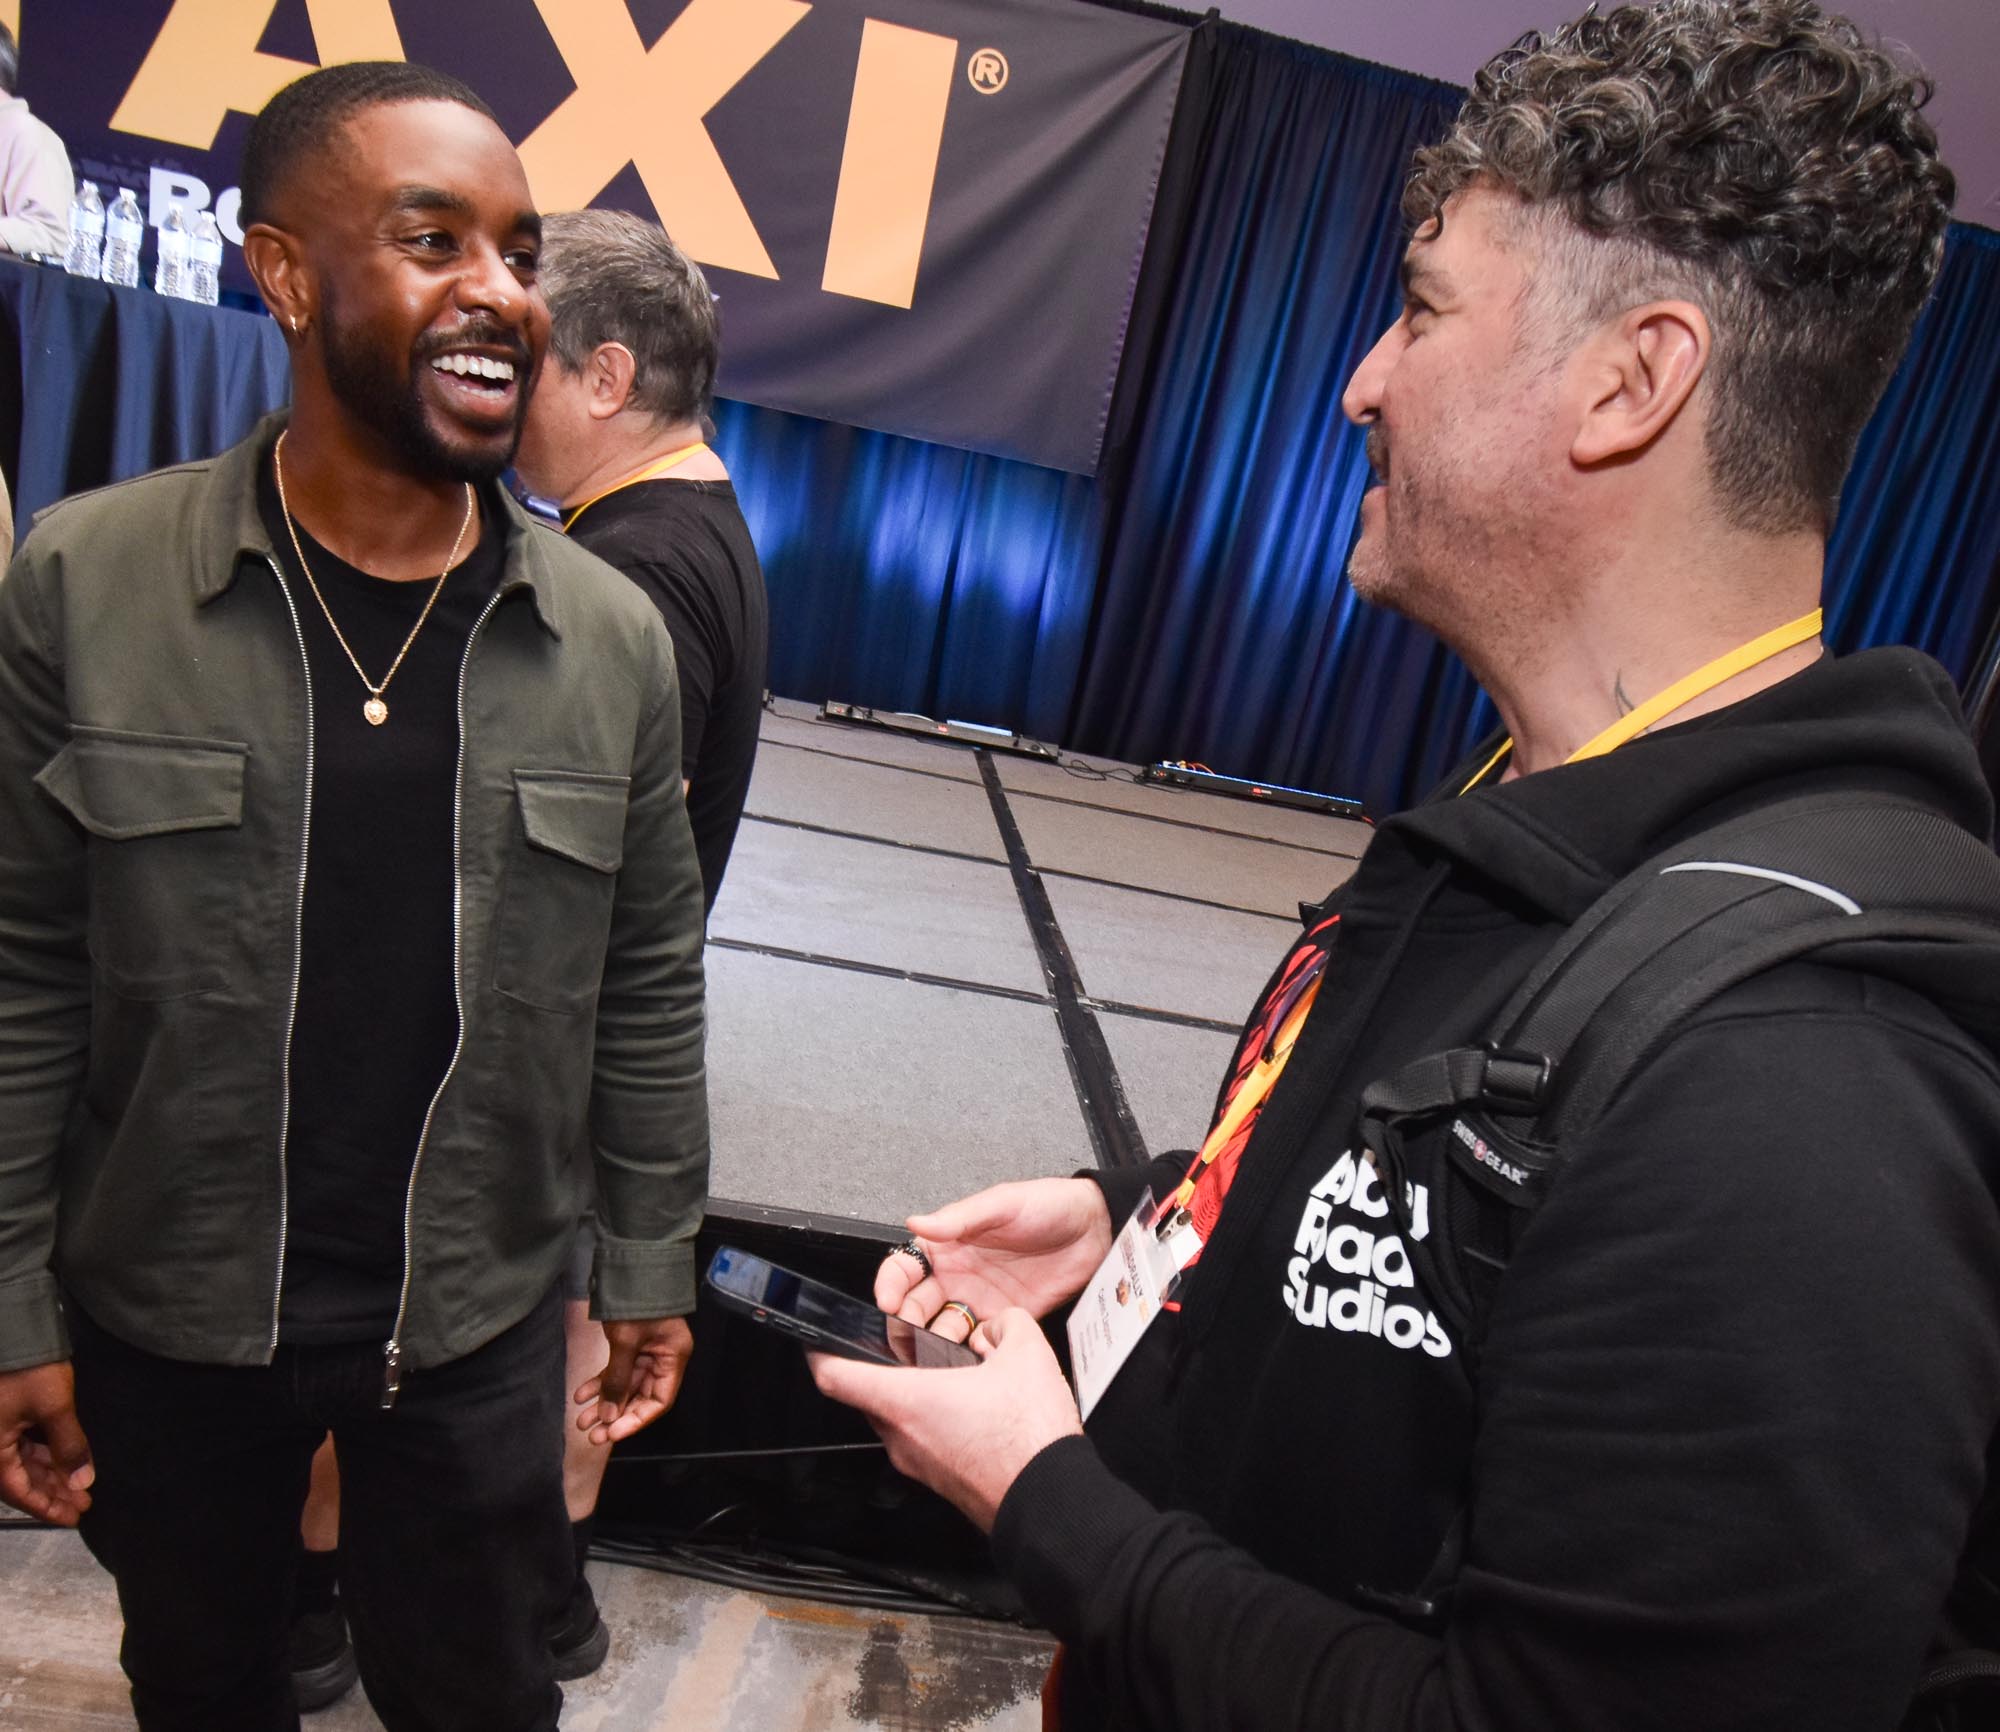 Hit Songwriter/Producer, Zaire Koalo, appears to be enjoying some conversation with a TAXI member.